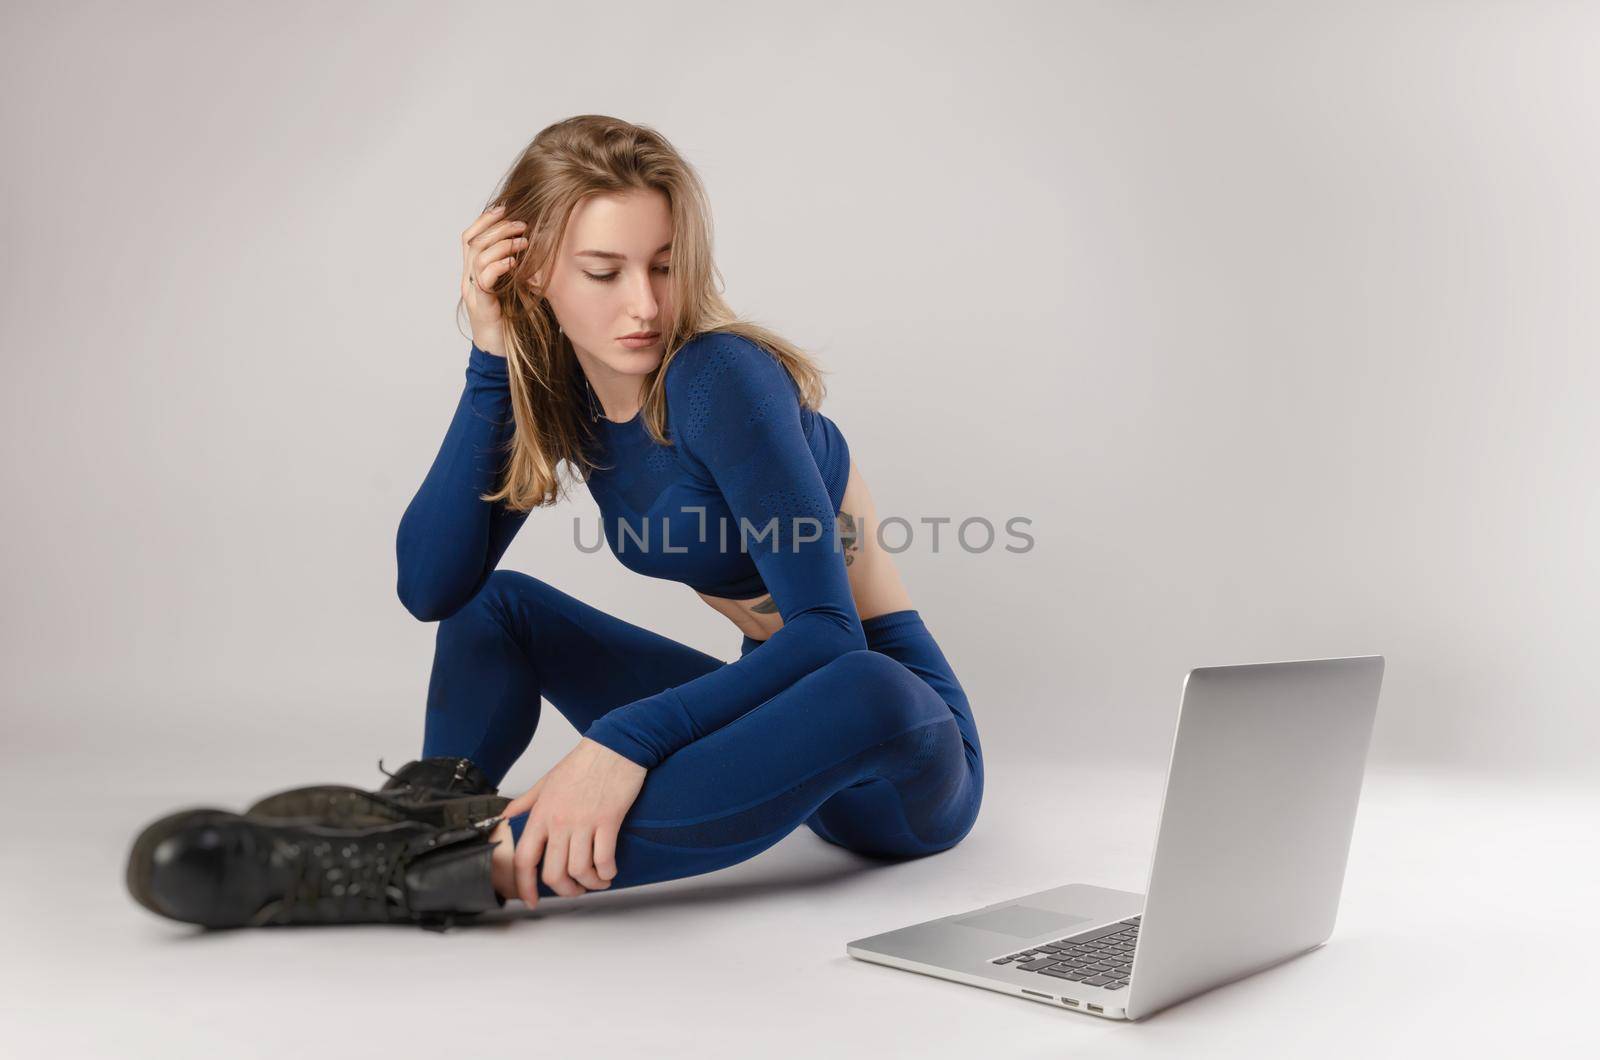 girl posing in the Studio performing exercises online on a laptop on a white background